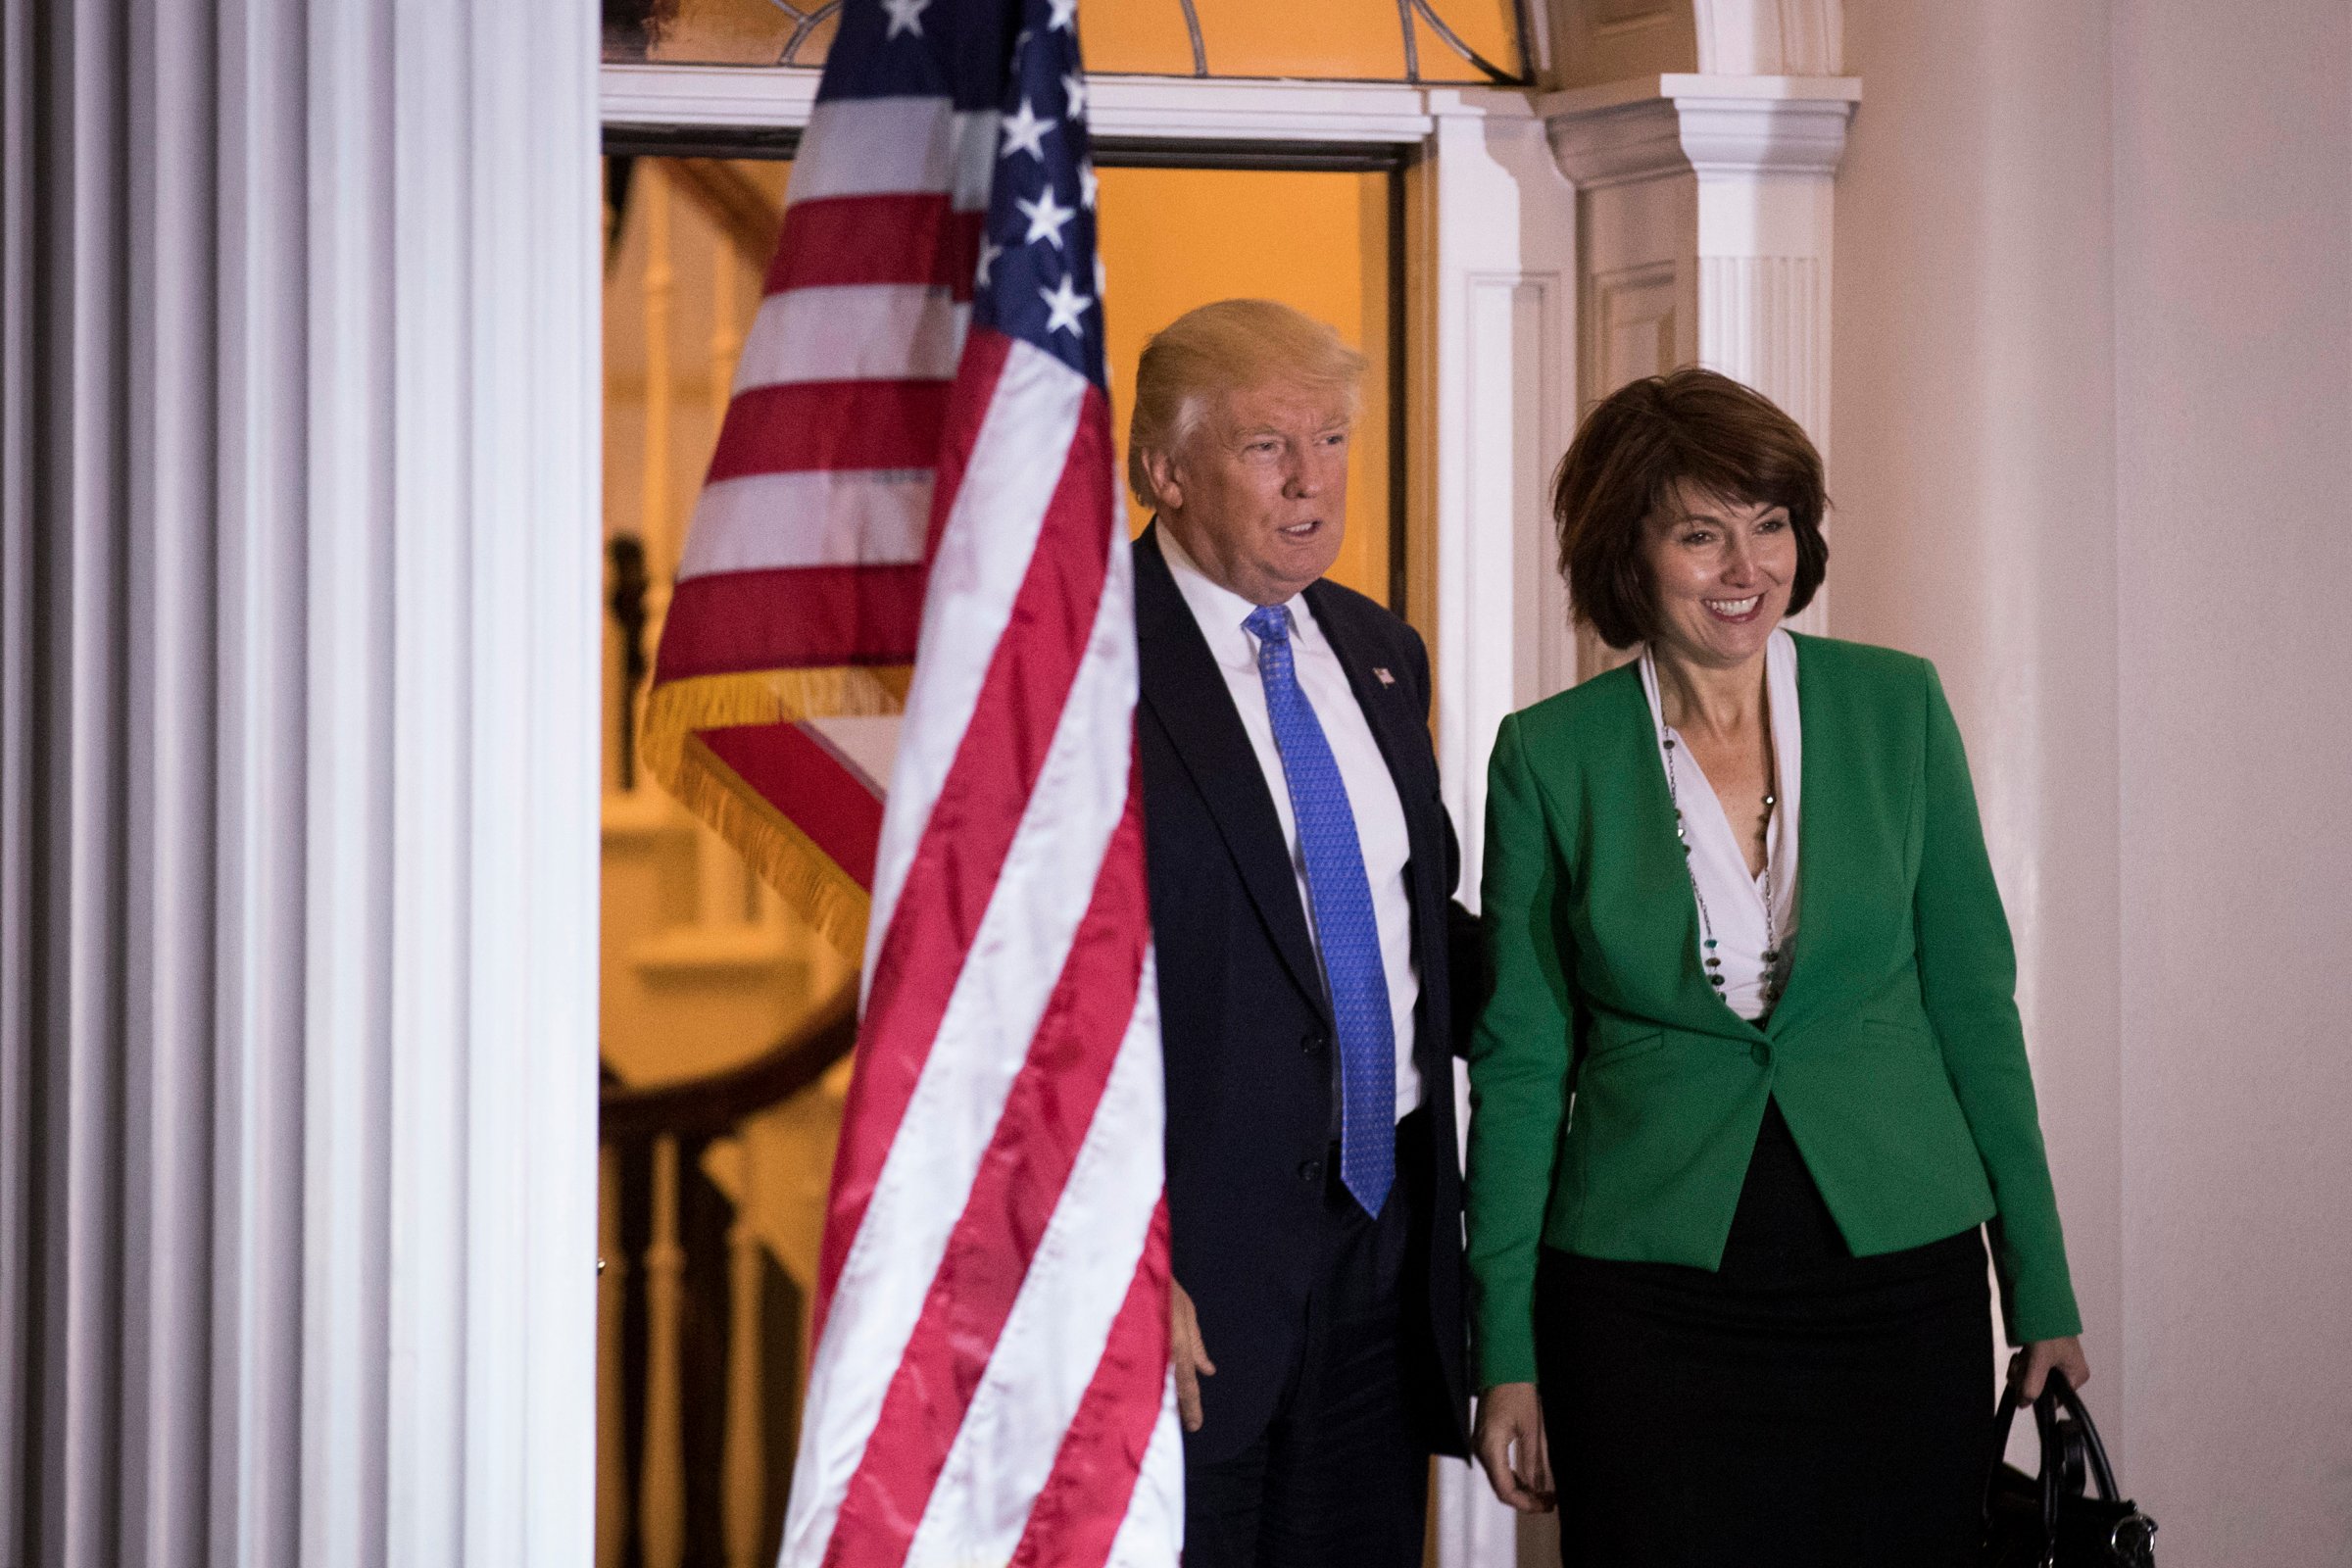 President-elect Donald Trump and U.S. Rep. Cathy McMorris Rodgers (R-WA) pose for a photo before their meeting at Trump International Golf Club, November 20, 2016 in Bedminster Township, New Jersey.